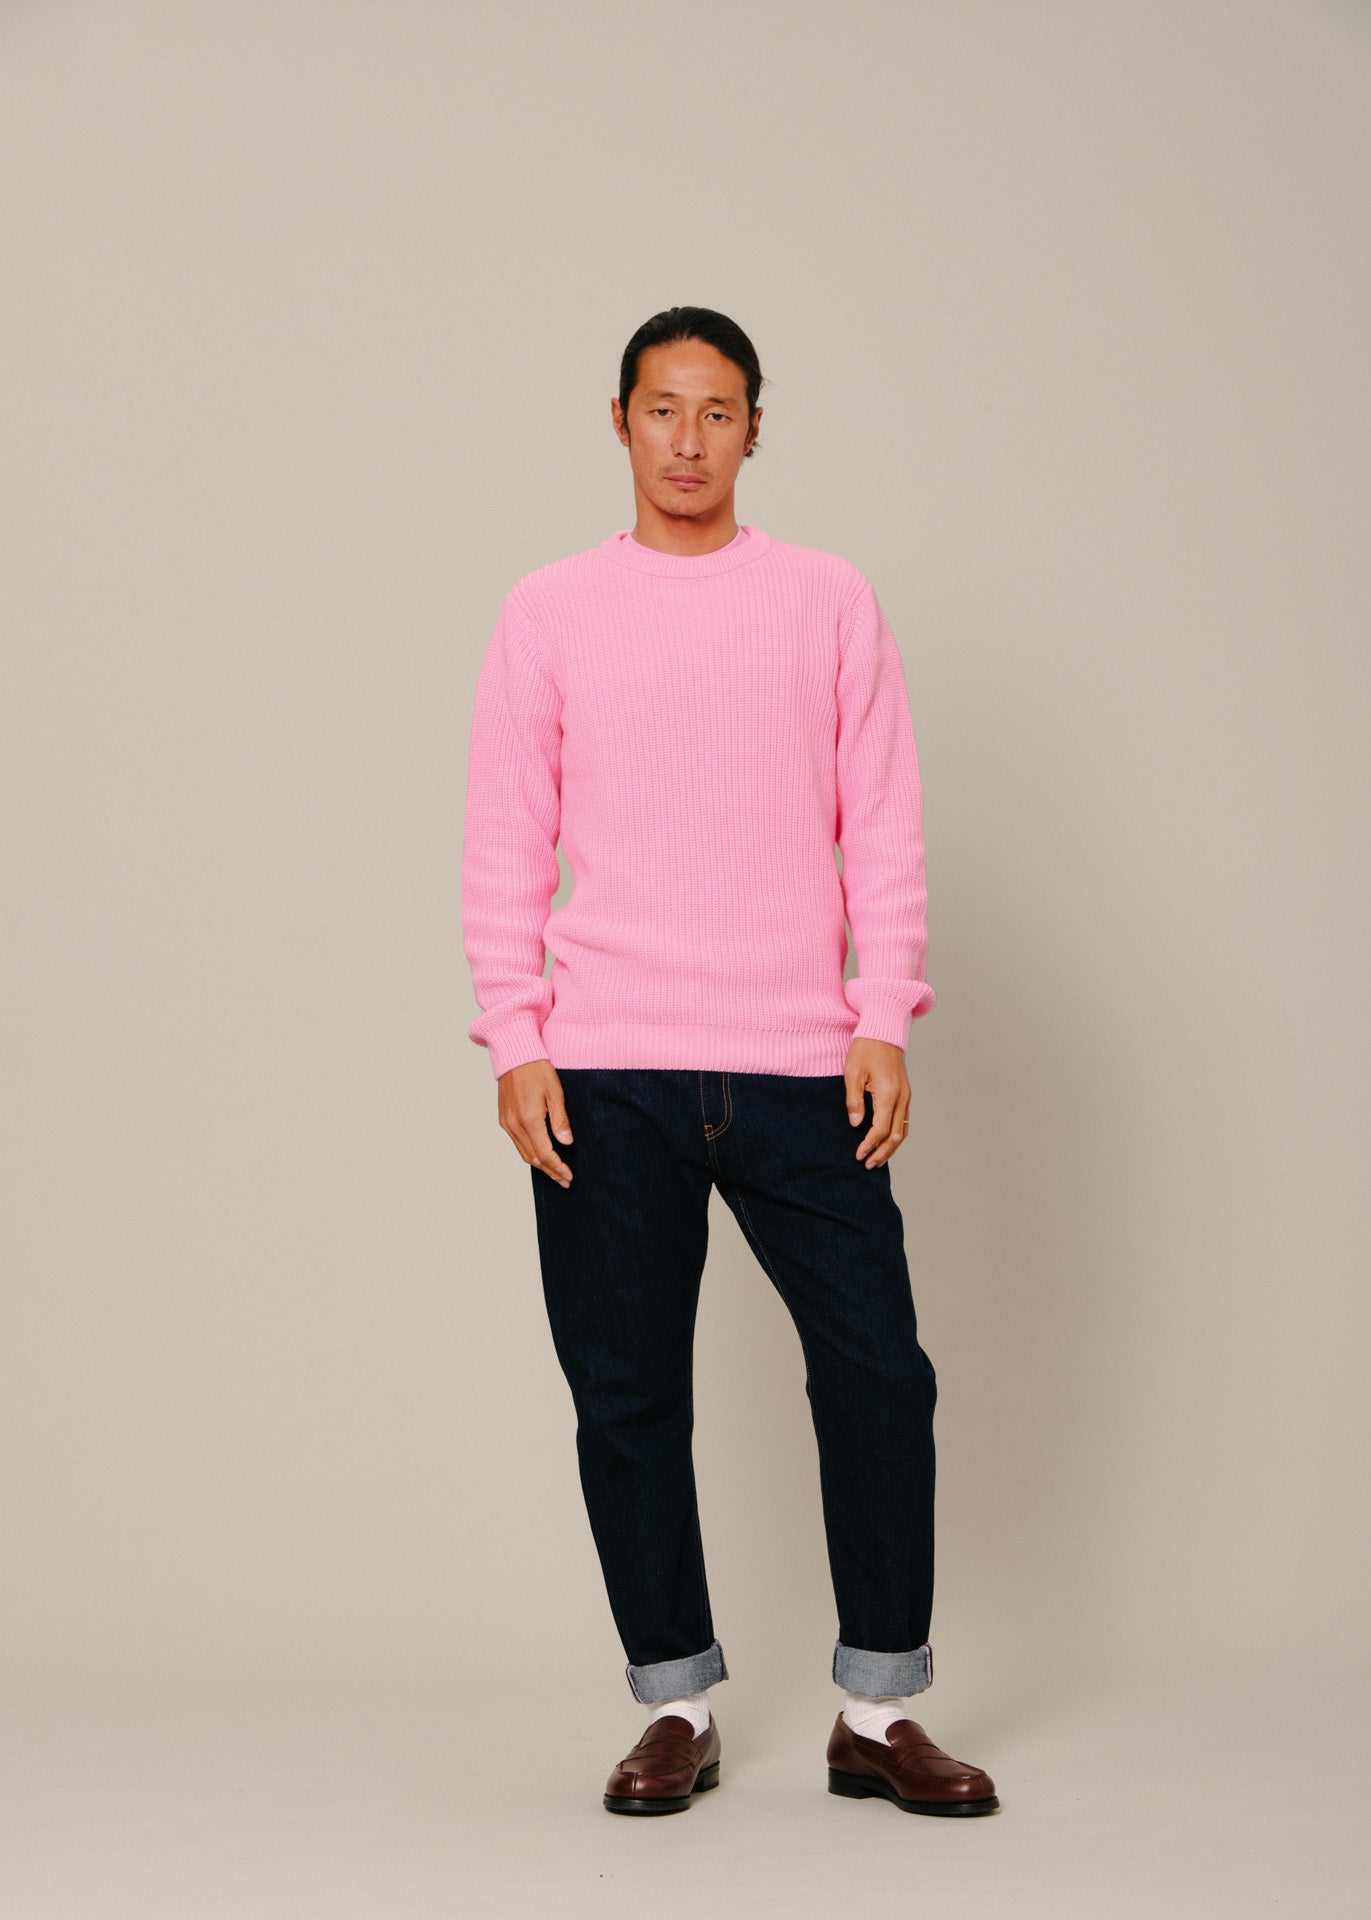 The Pink knit